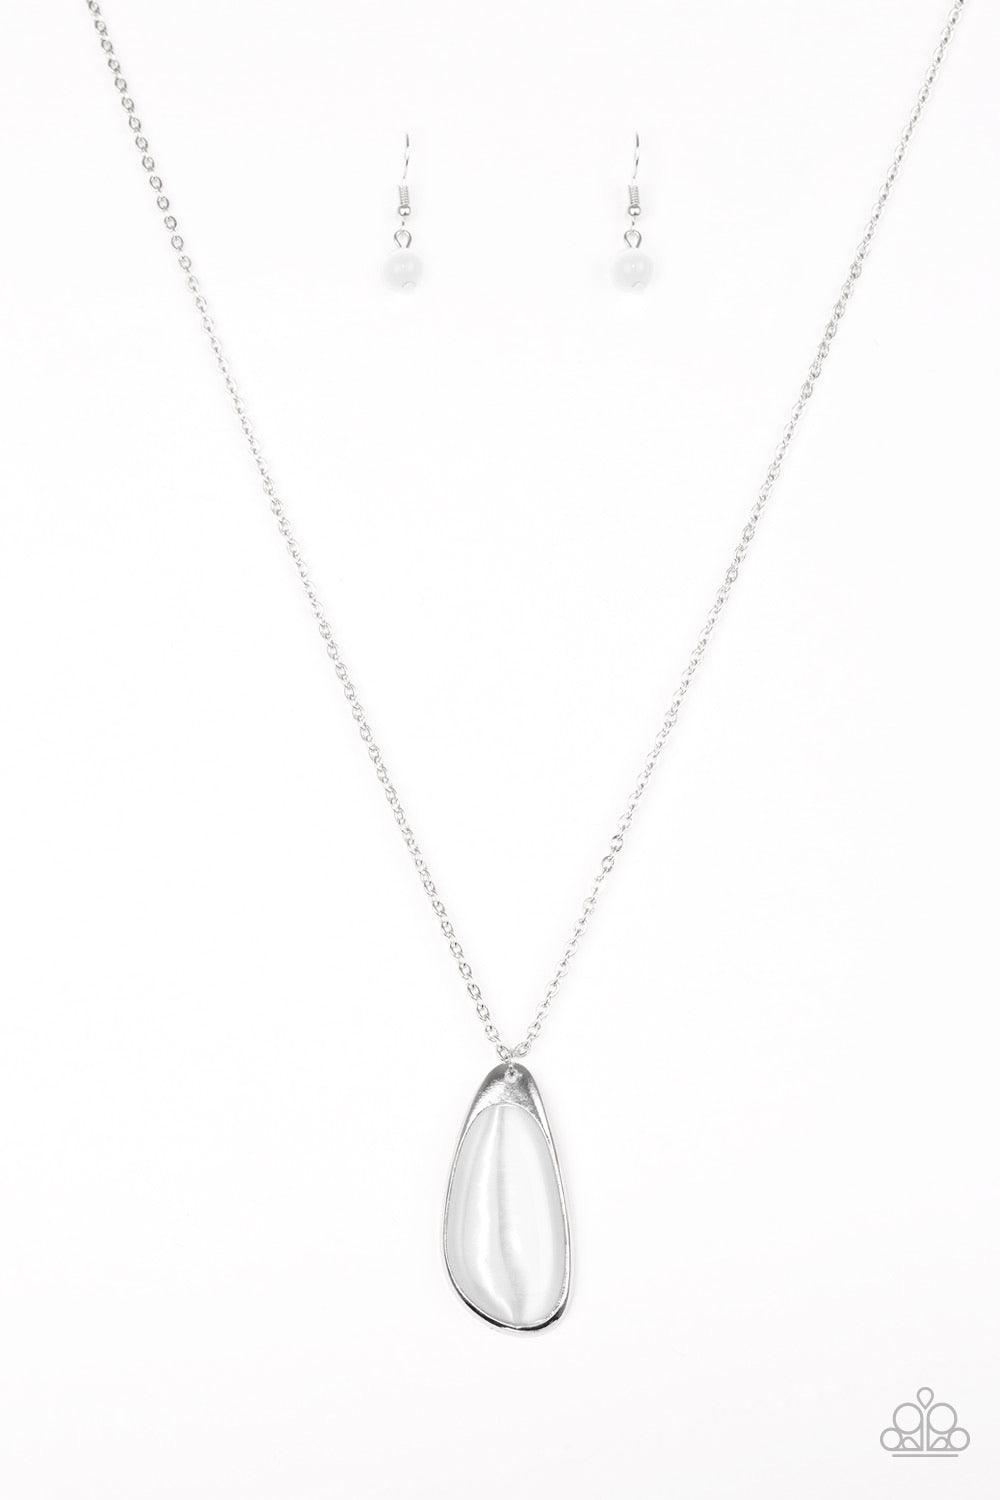 Paparazzi Accessories Magically Modern - White A glowing white moonstone is pressed into an asymmetrical silver frame, creating a whimsical pendant. Features an adjustable clasp closure. Sold as one individual necklace. Includes one pair of matching earri